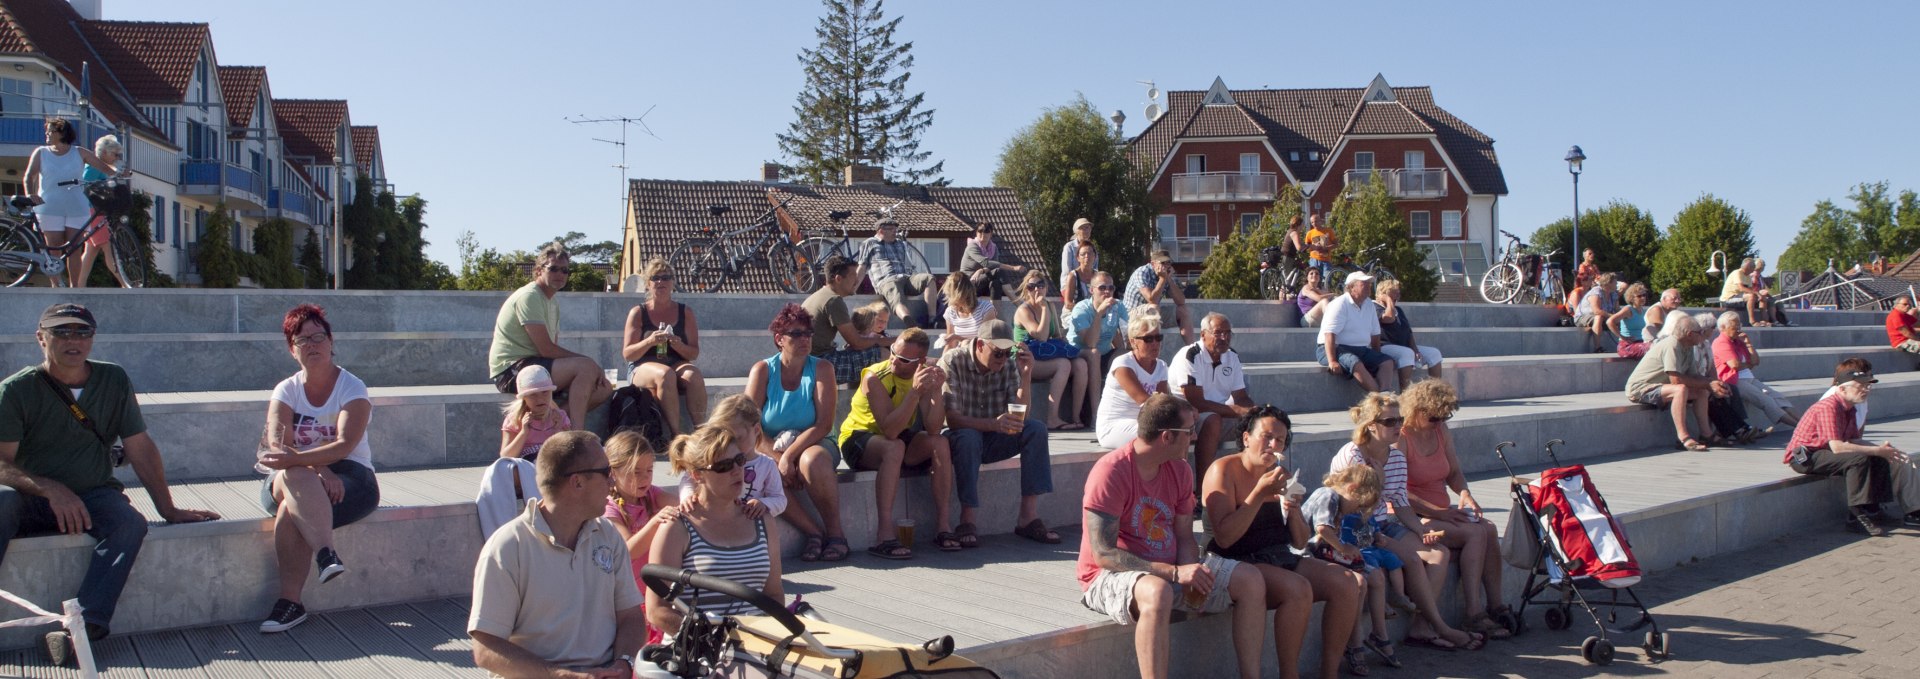 Zingst harbor - ideal place to relax. Harbor concerts provide entertainment here., © Frank Burger